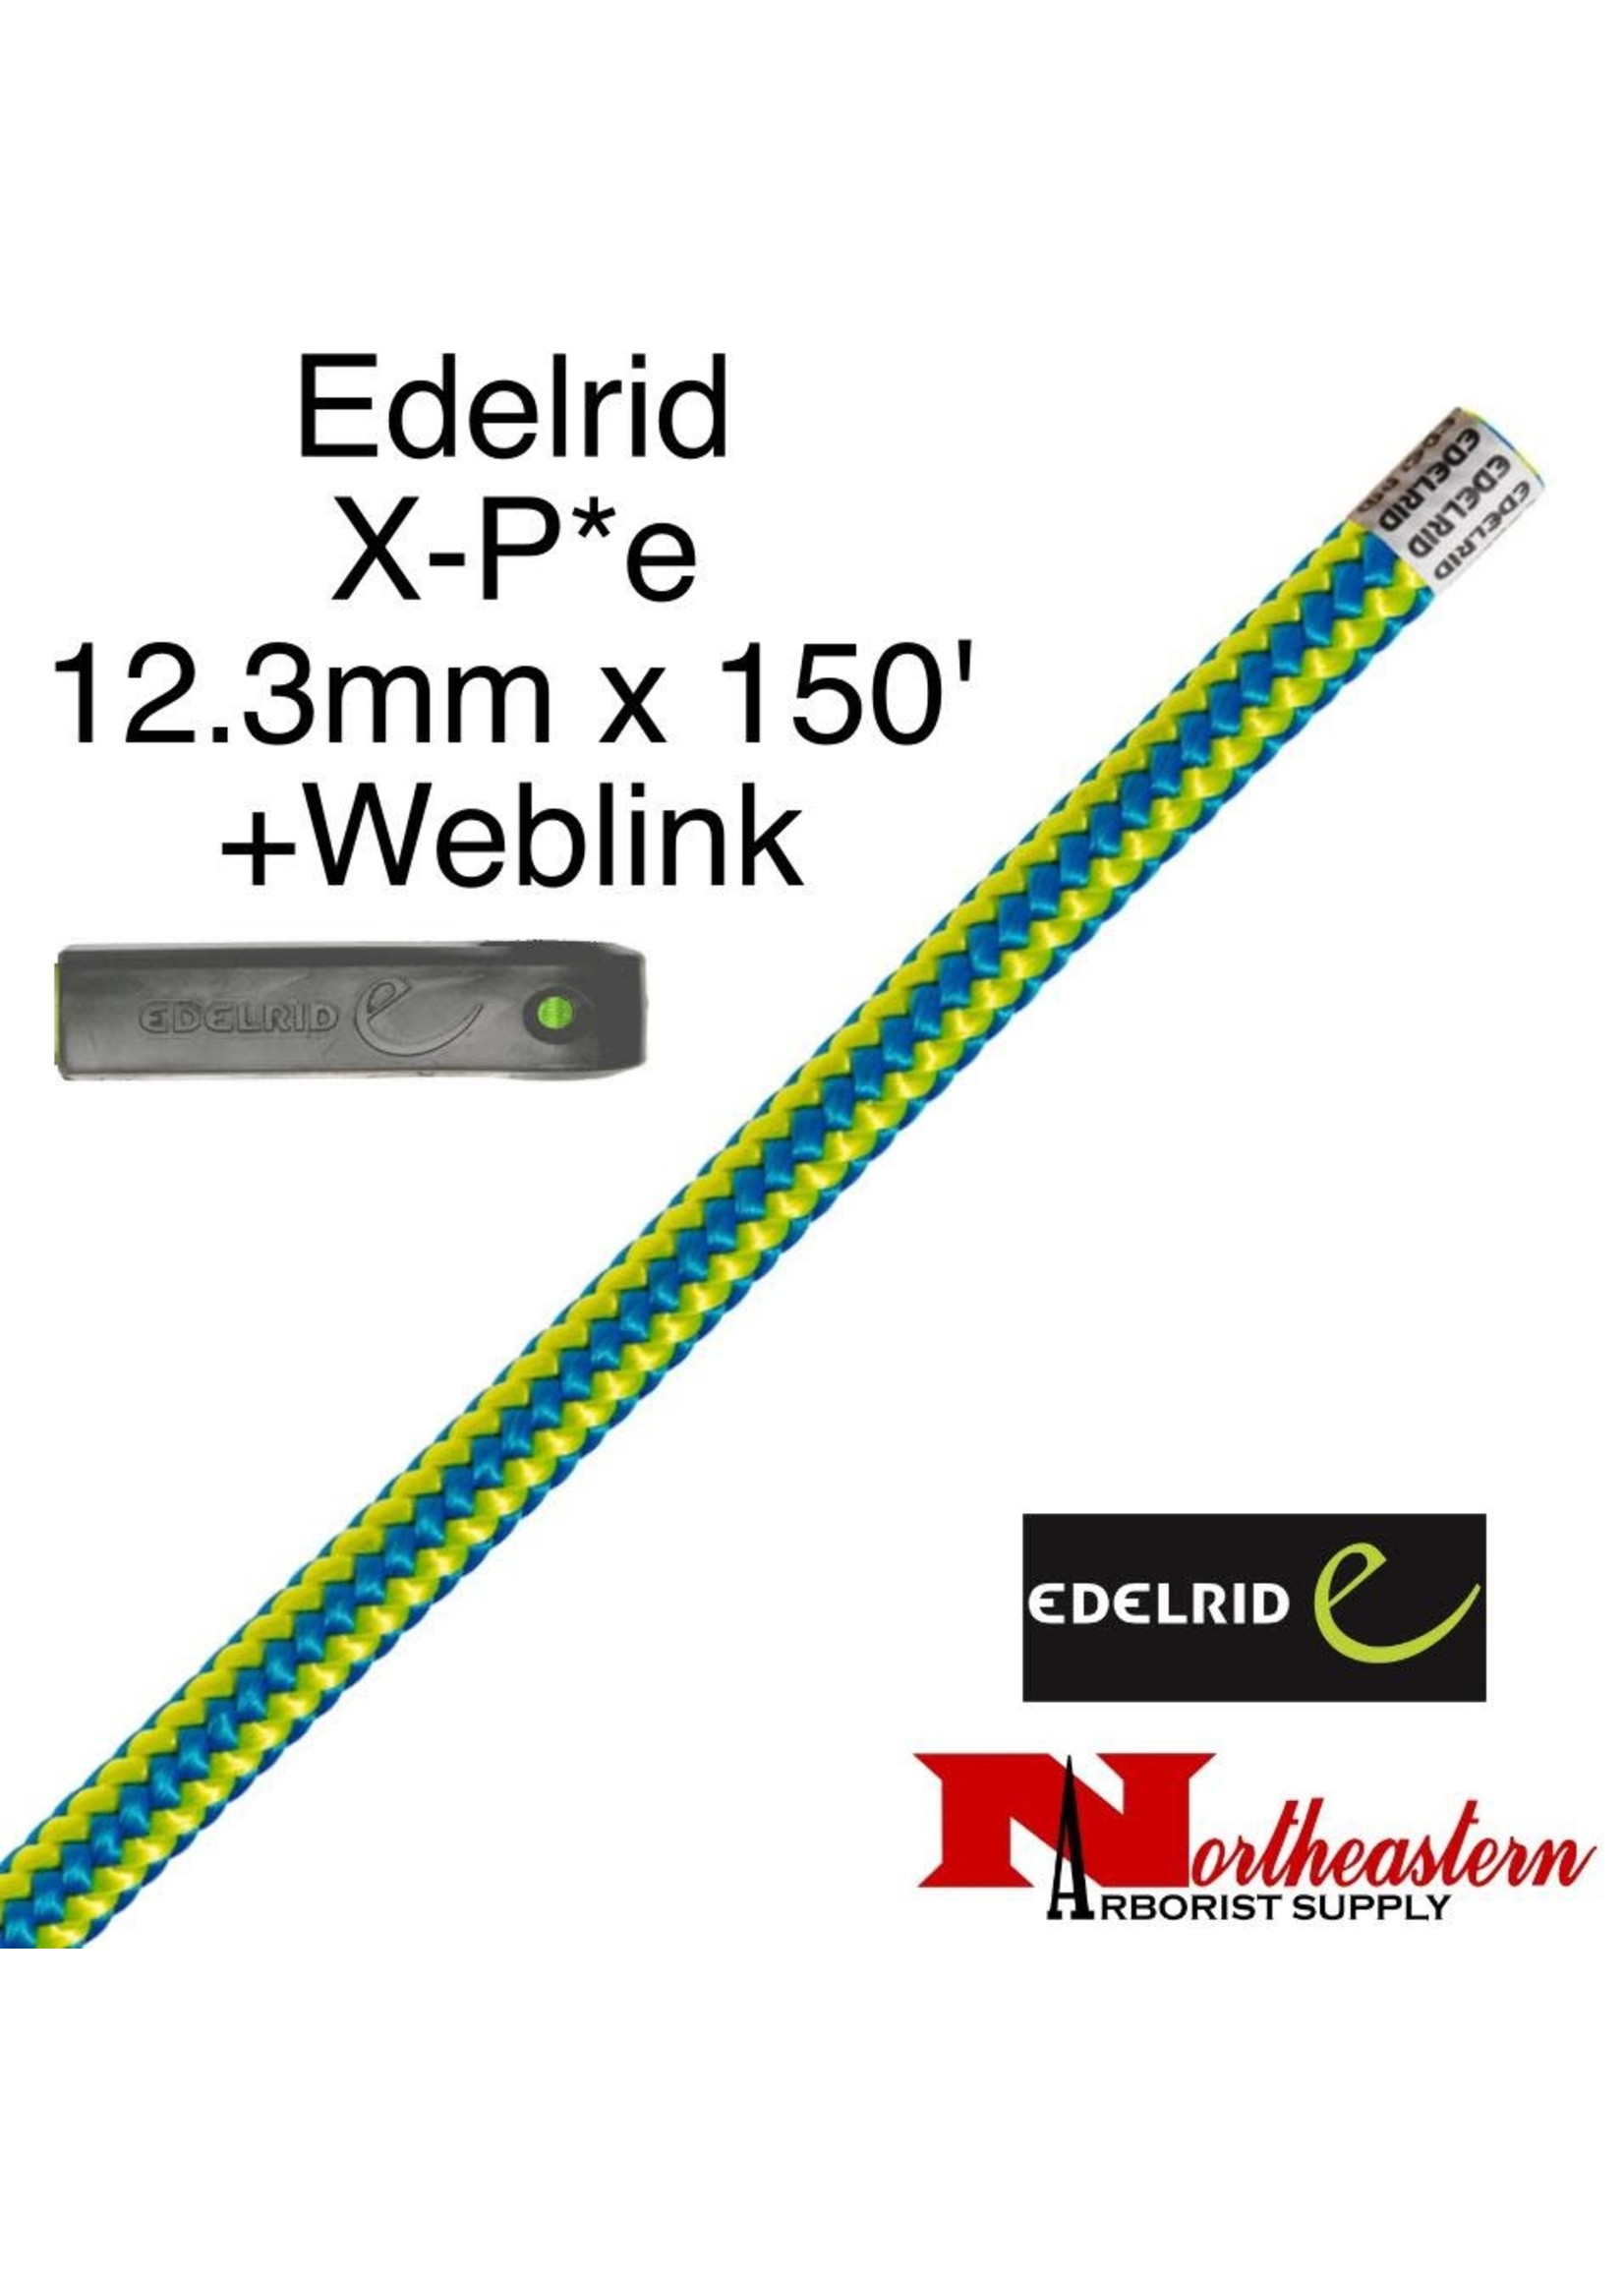 EDELRID X-P*E 12.3mm x 150' with Weblink Timber Blue